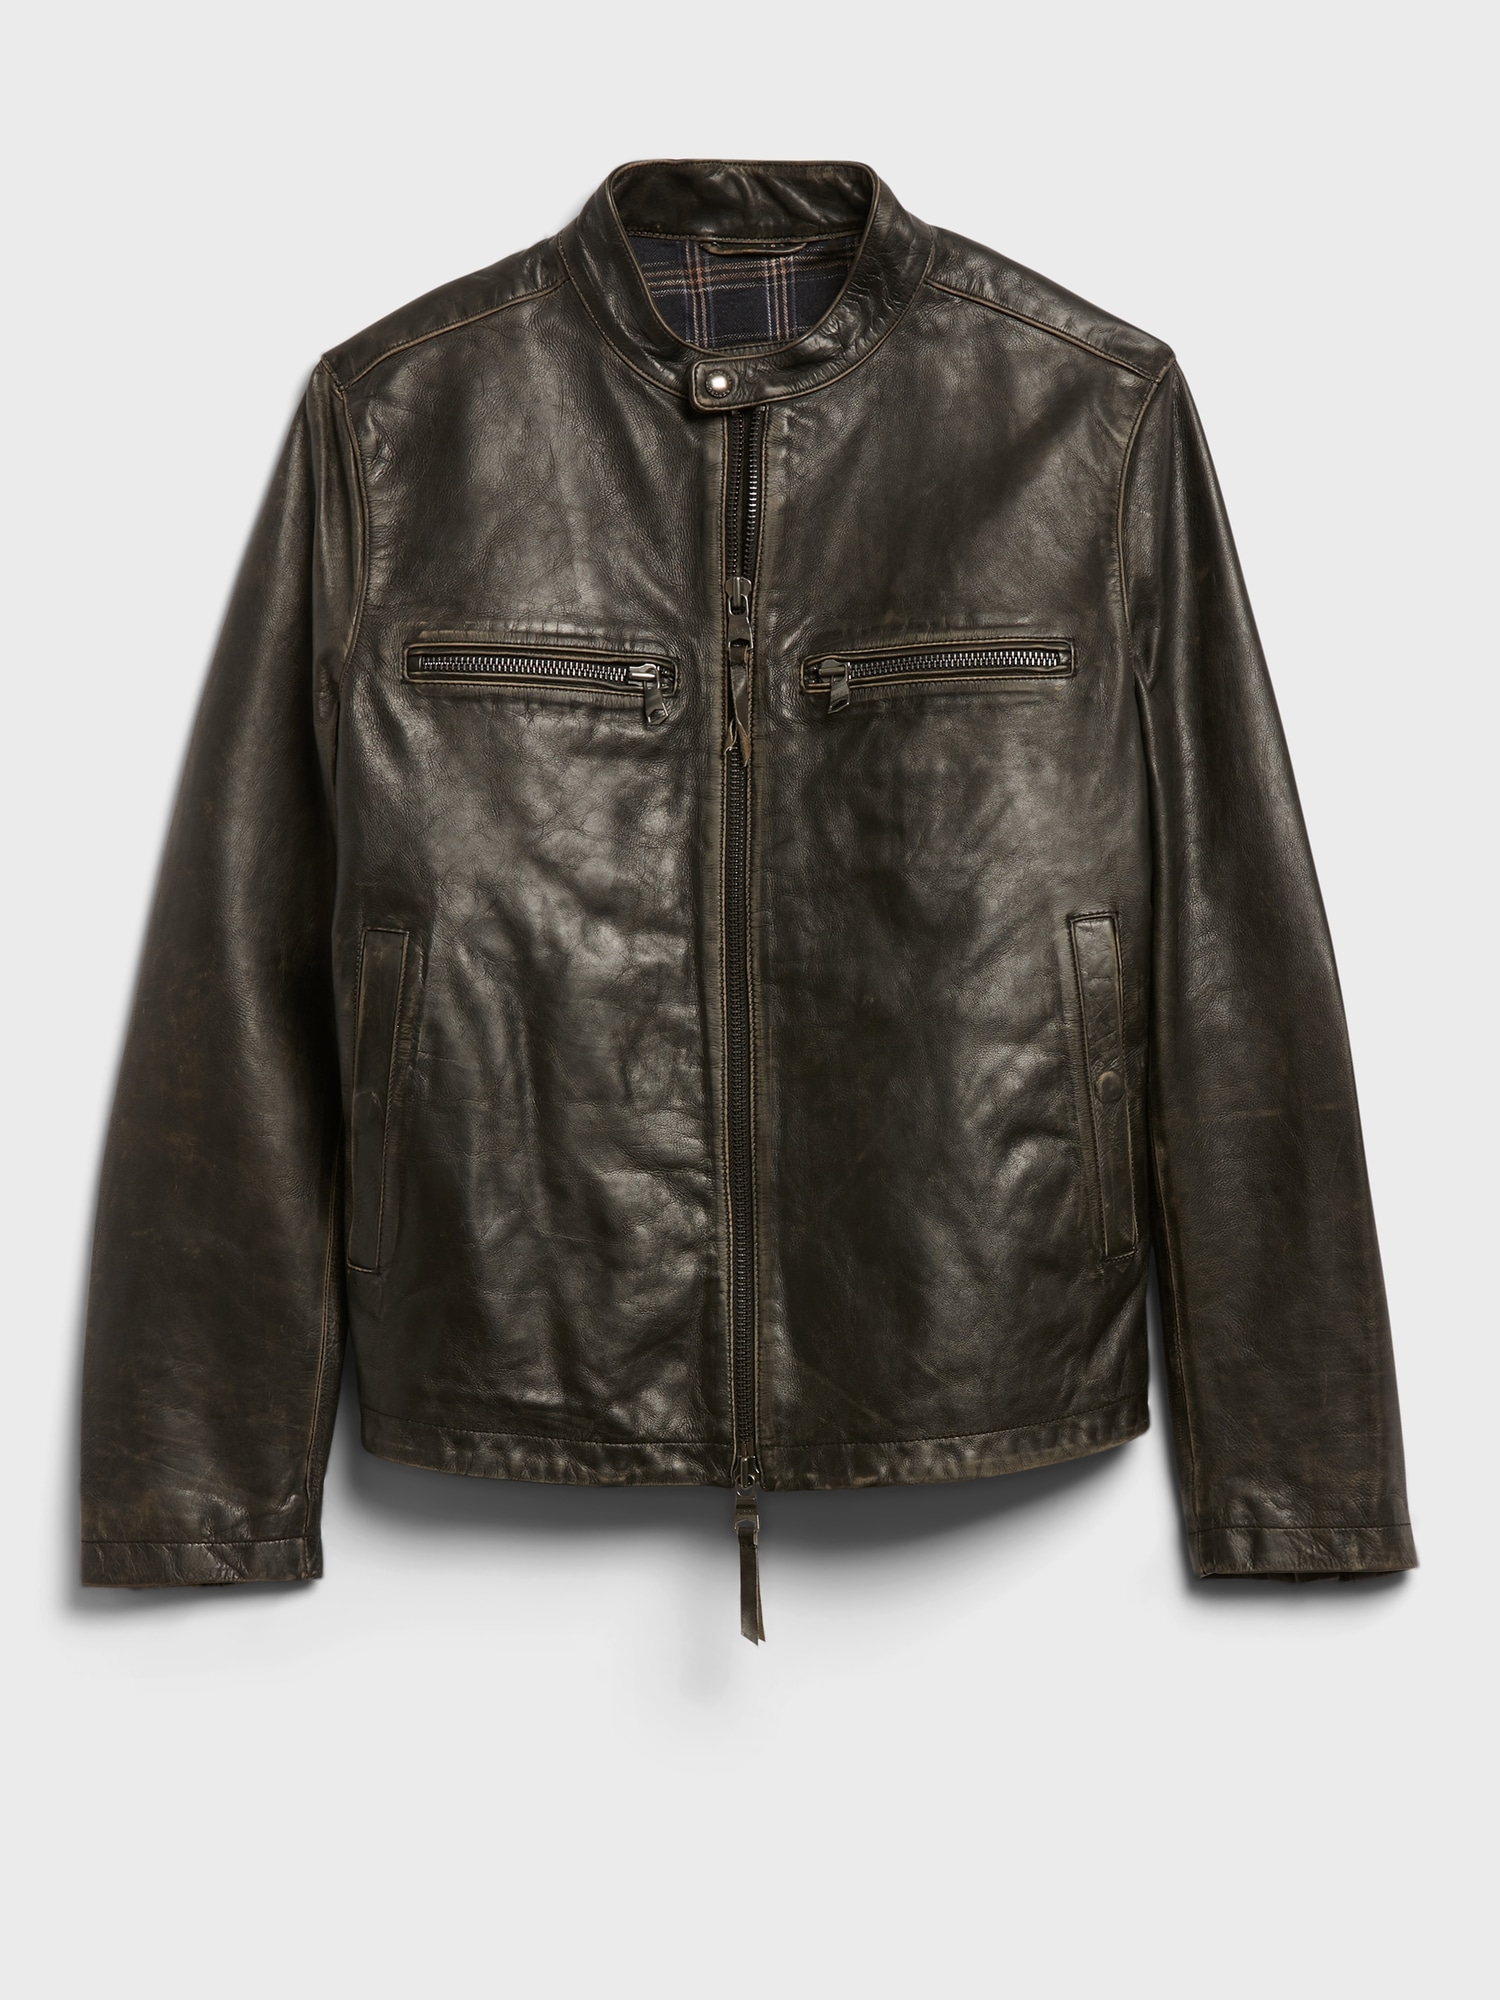 Men's Leather Jackets, Motorcycle Style Jackets